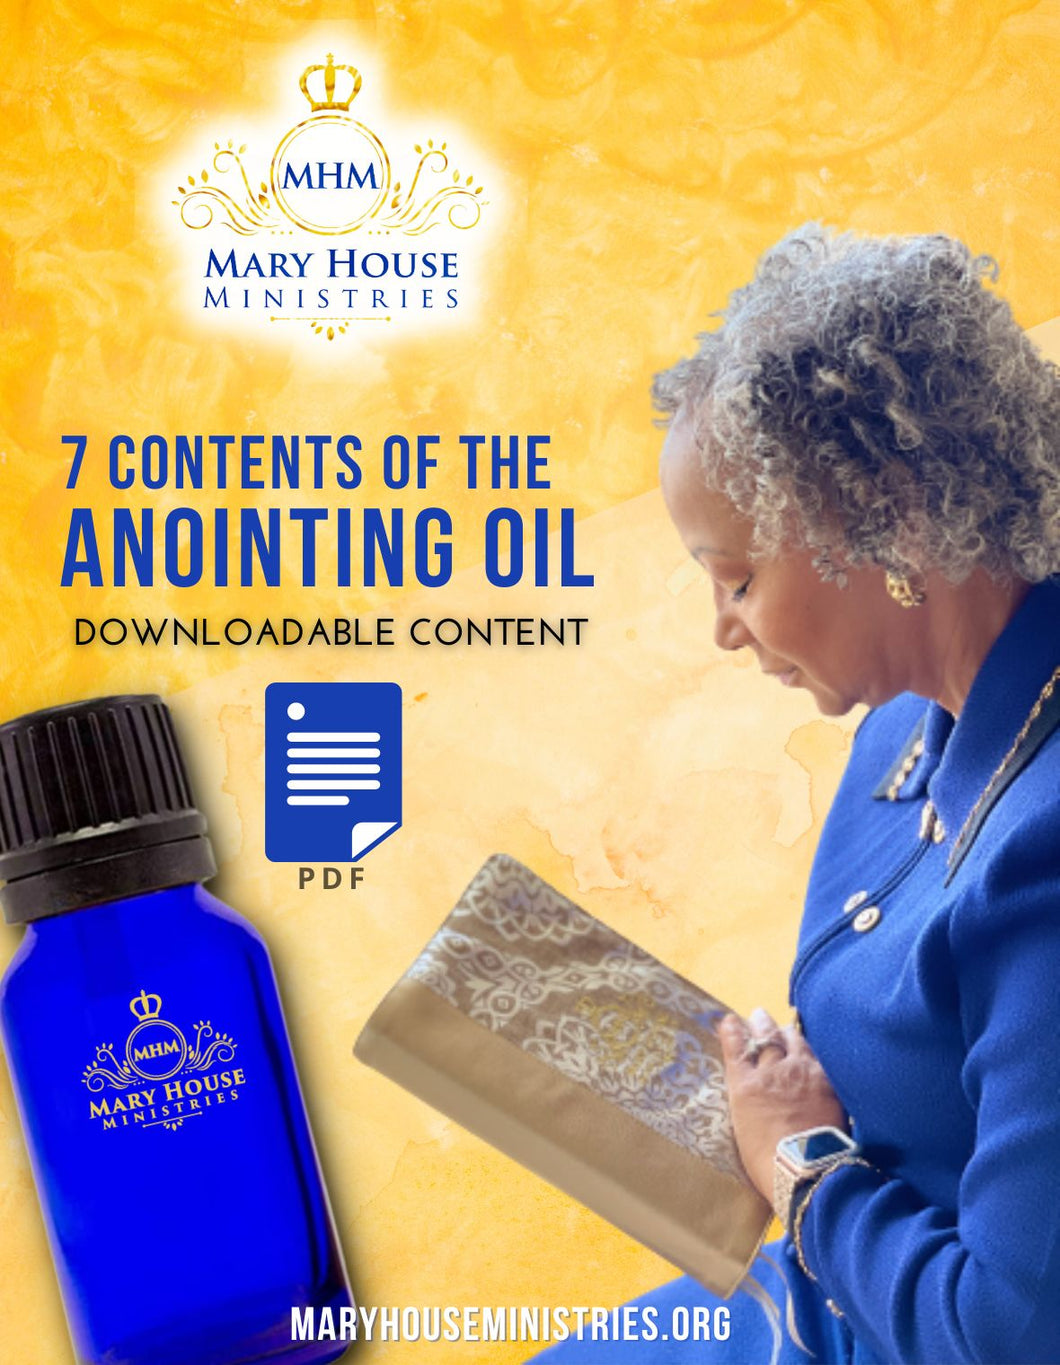 Anointing Oil Document (Downloadable Content)